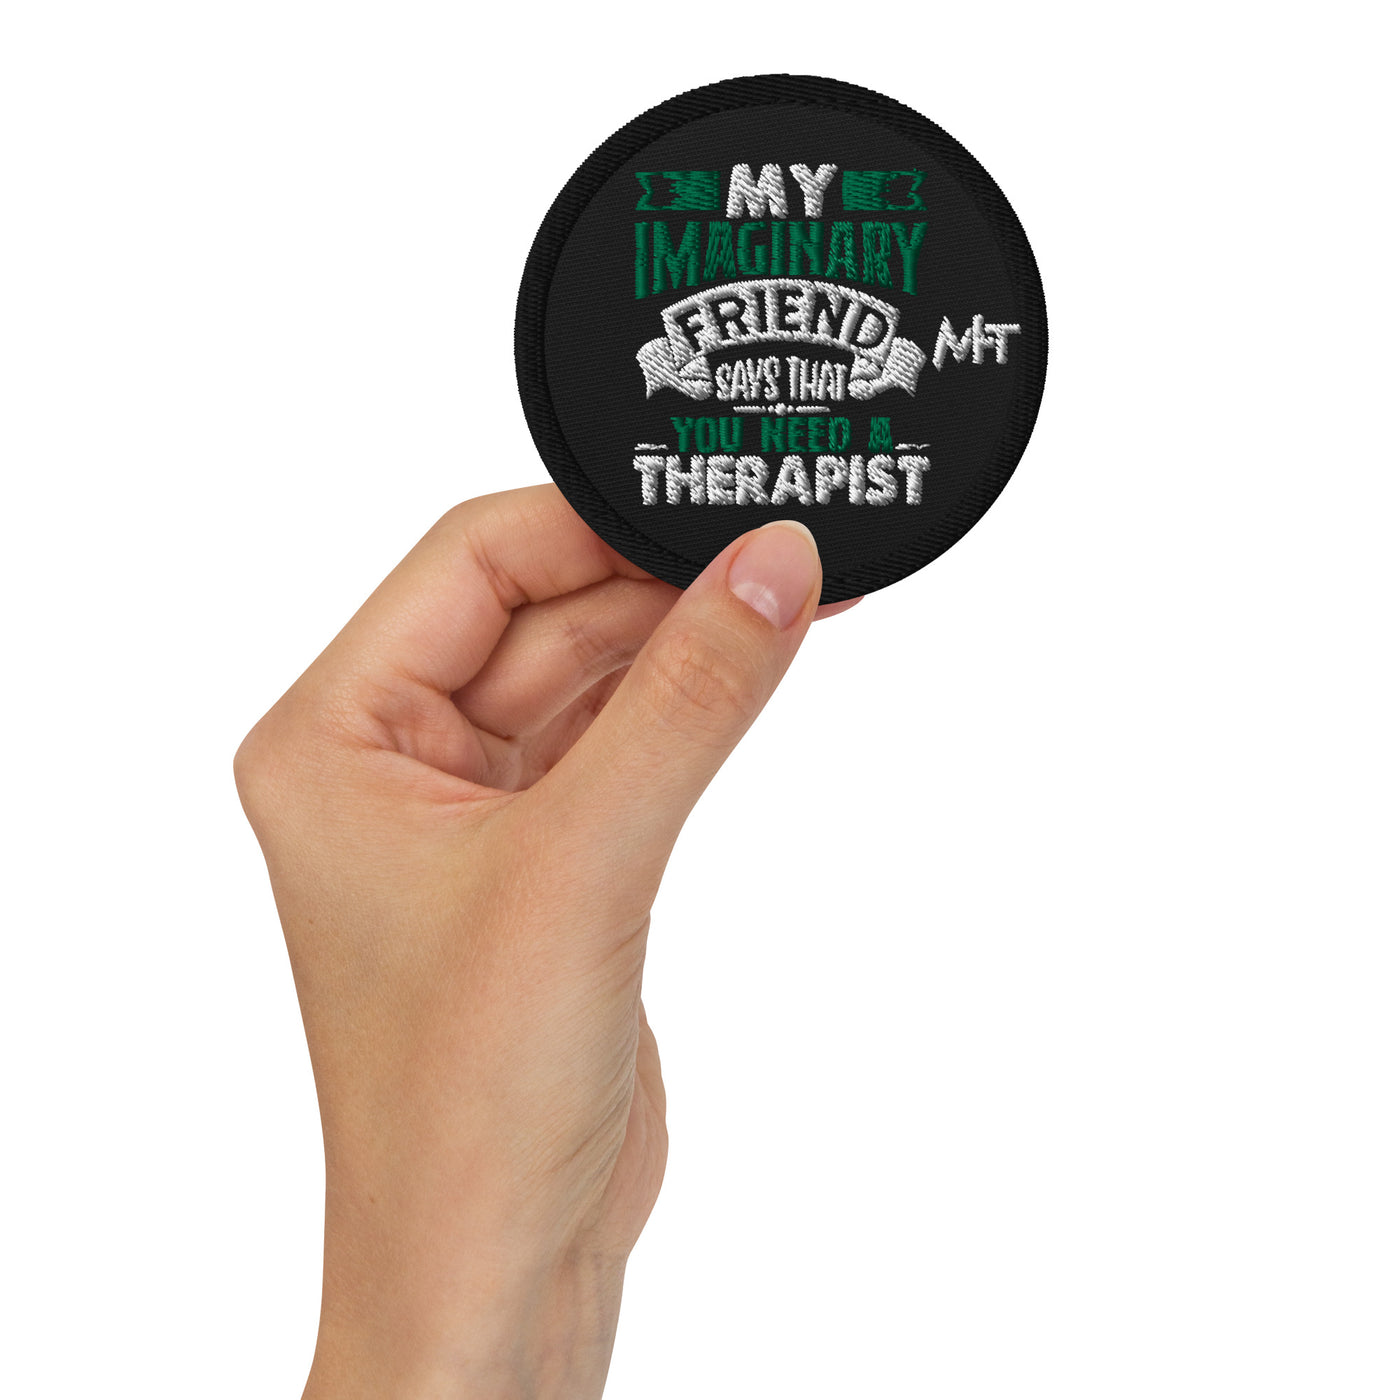 My imaginary friend Says you Need a therapist - Embroidered patches